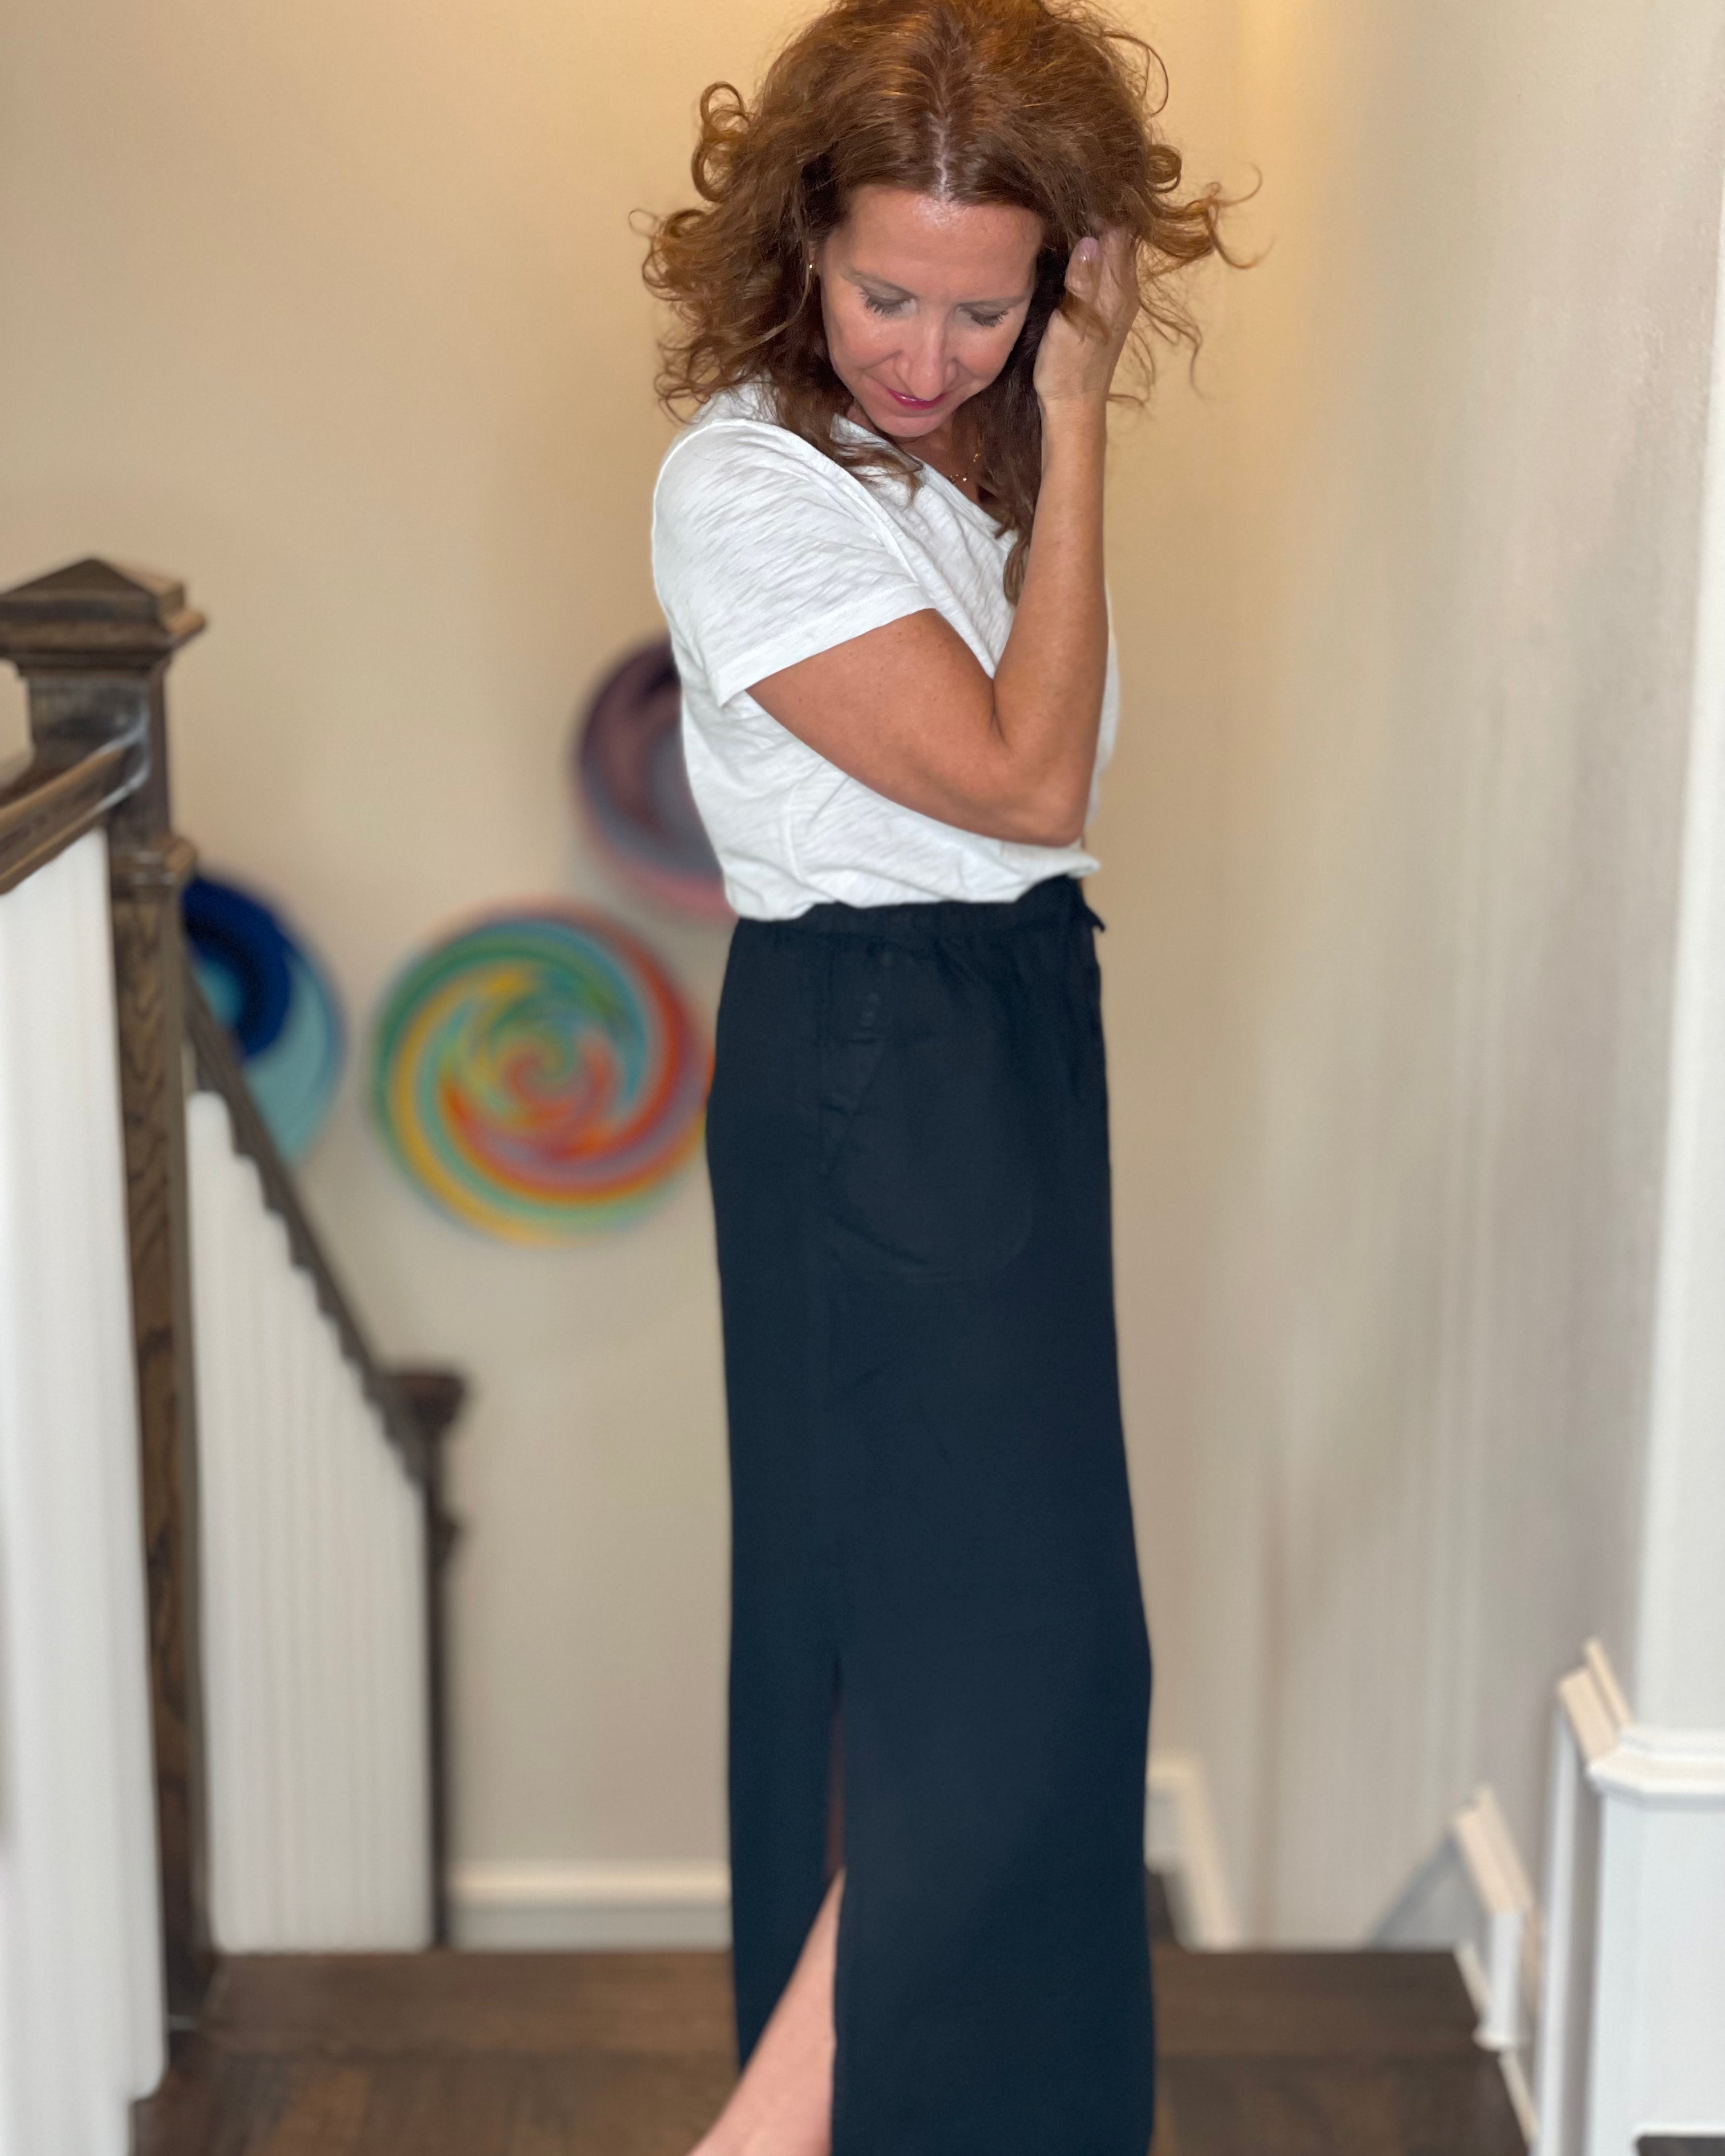 Pure Amici Long Linen Skirt in Black.